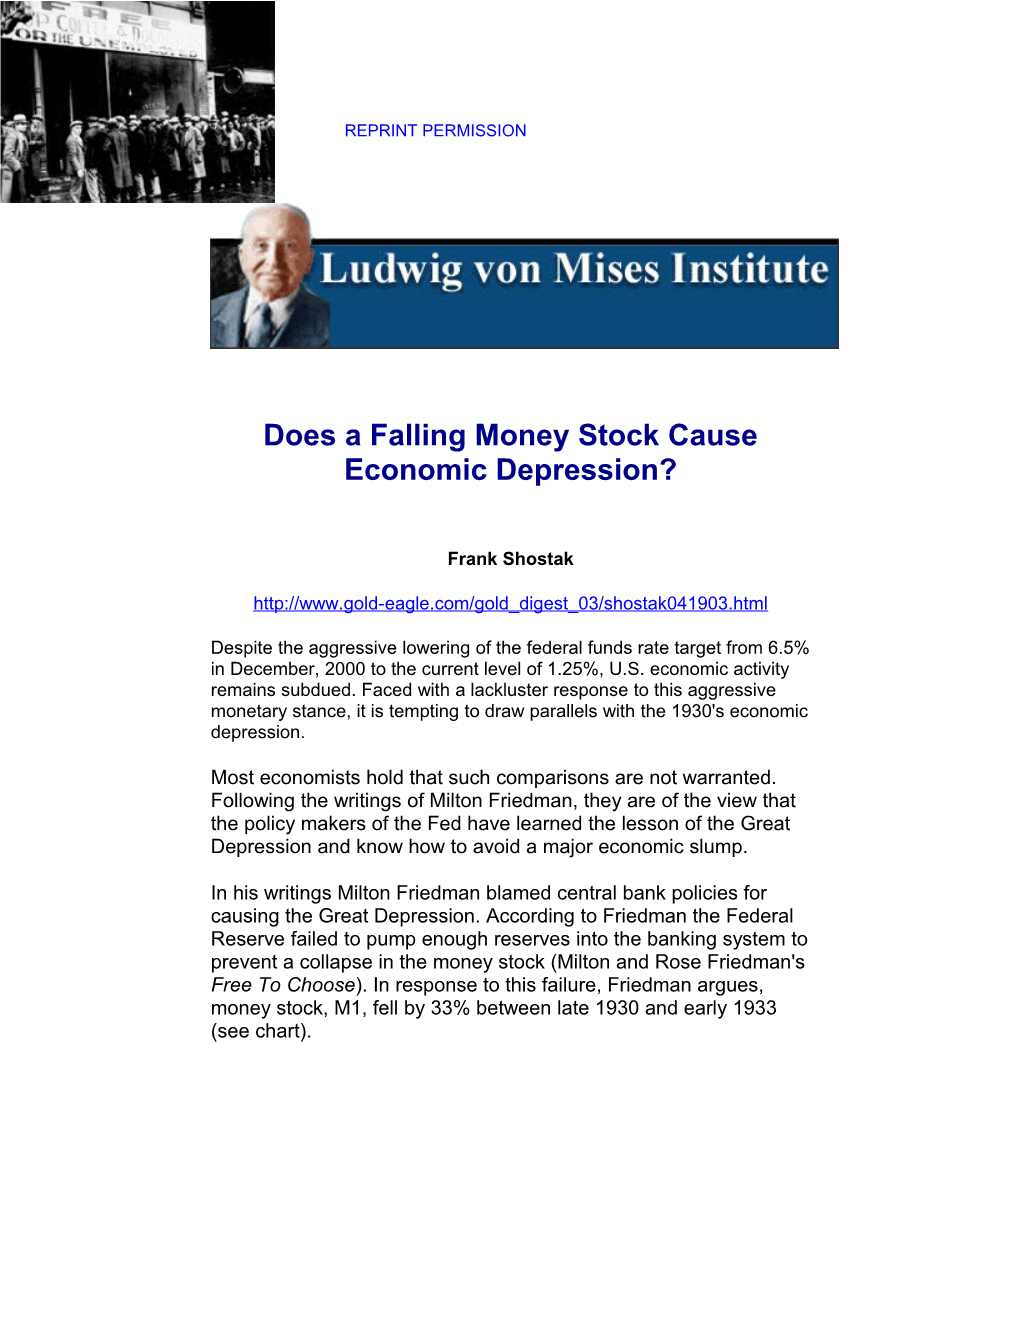 Does a Falling Money Stock Cause Economic Depression?